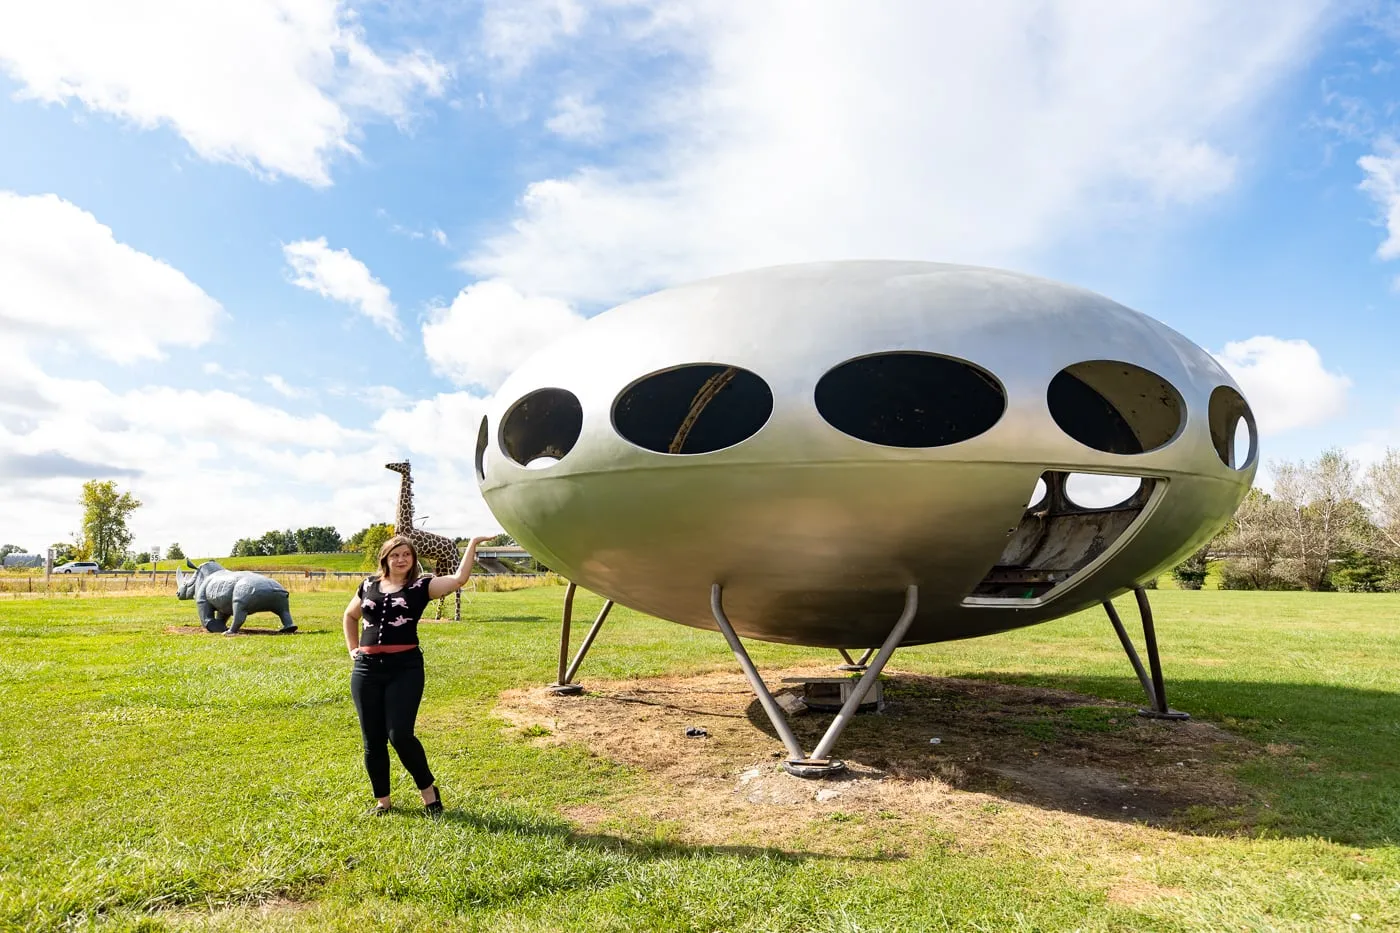 Futuro House UFO shaped home at the Pink Elephant Antique Mall in Livingston, Illinois - Route 66 Roadside Attraction